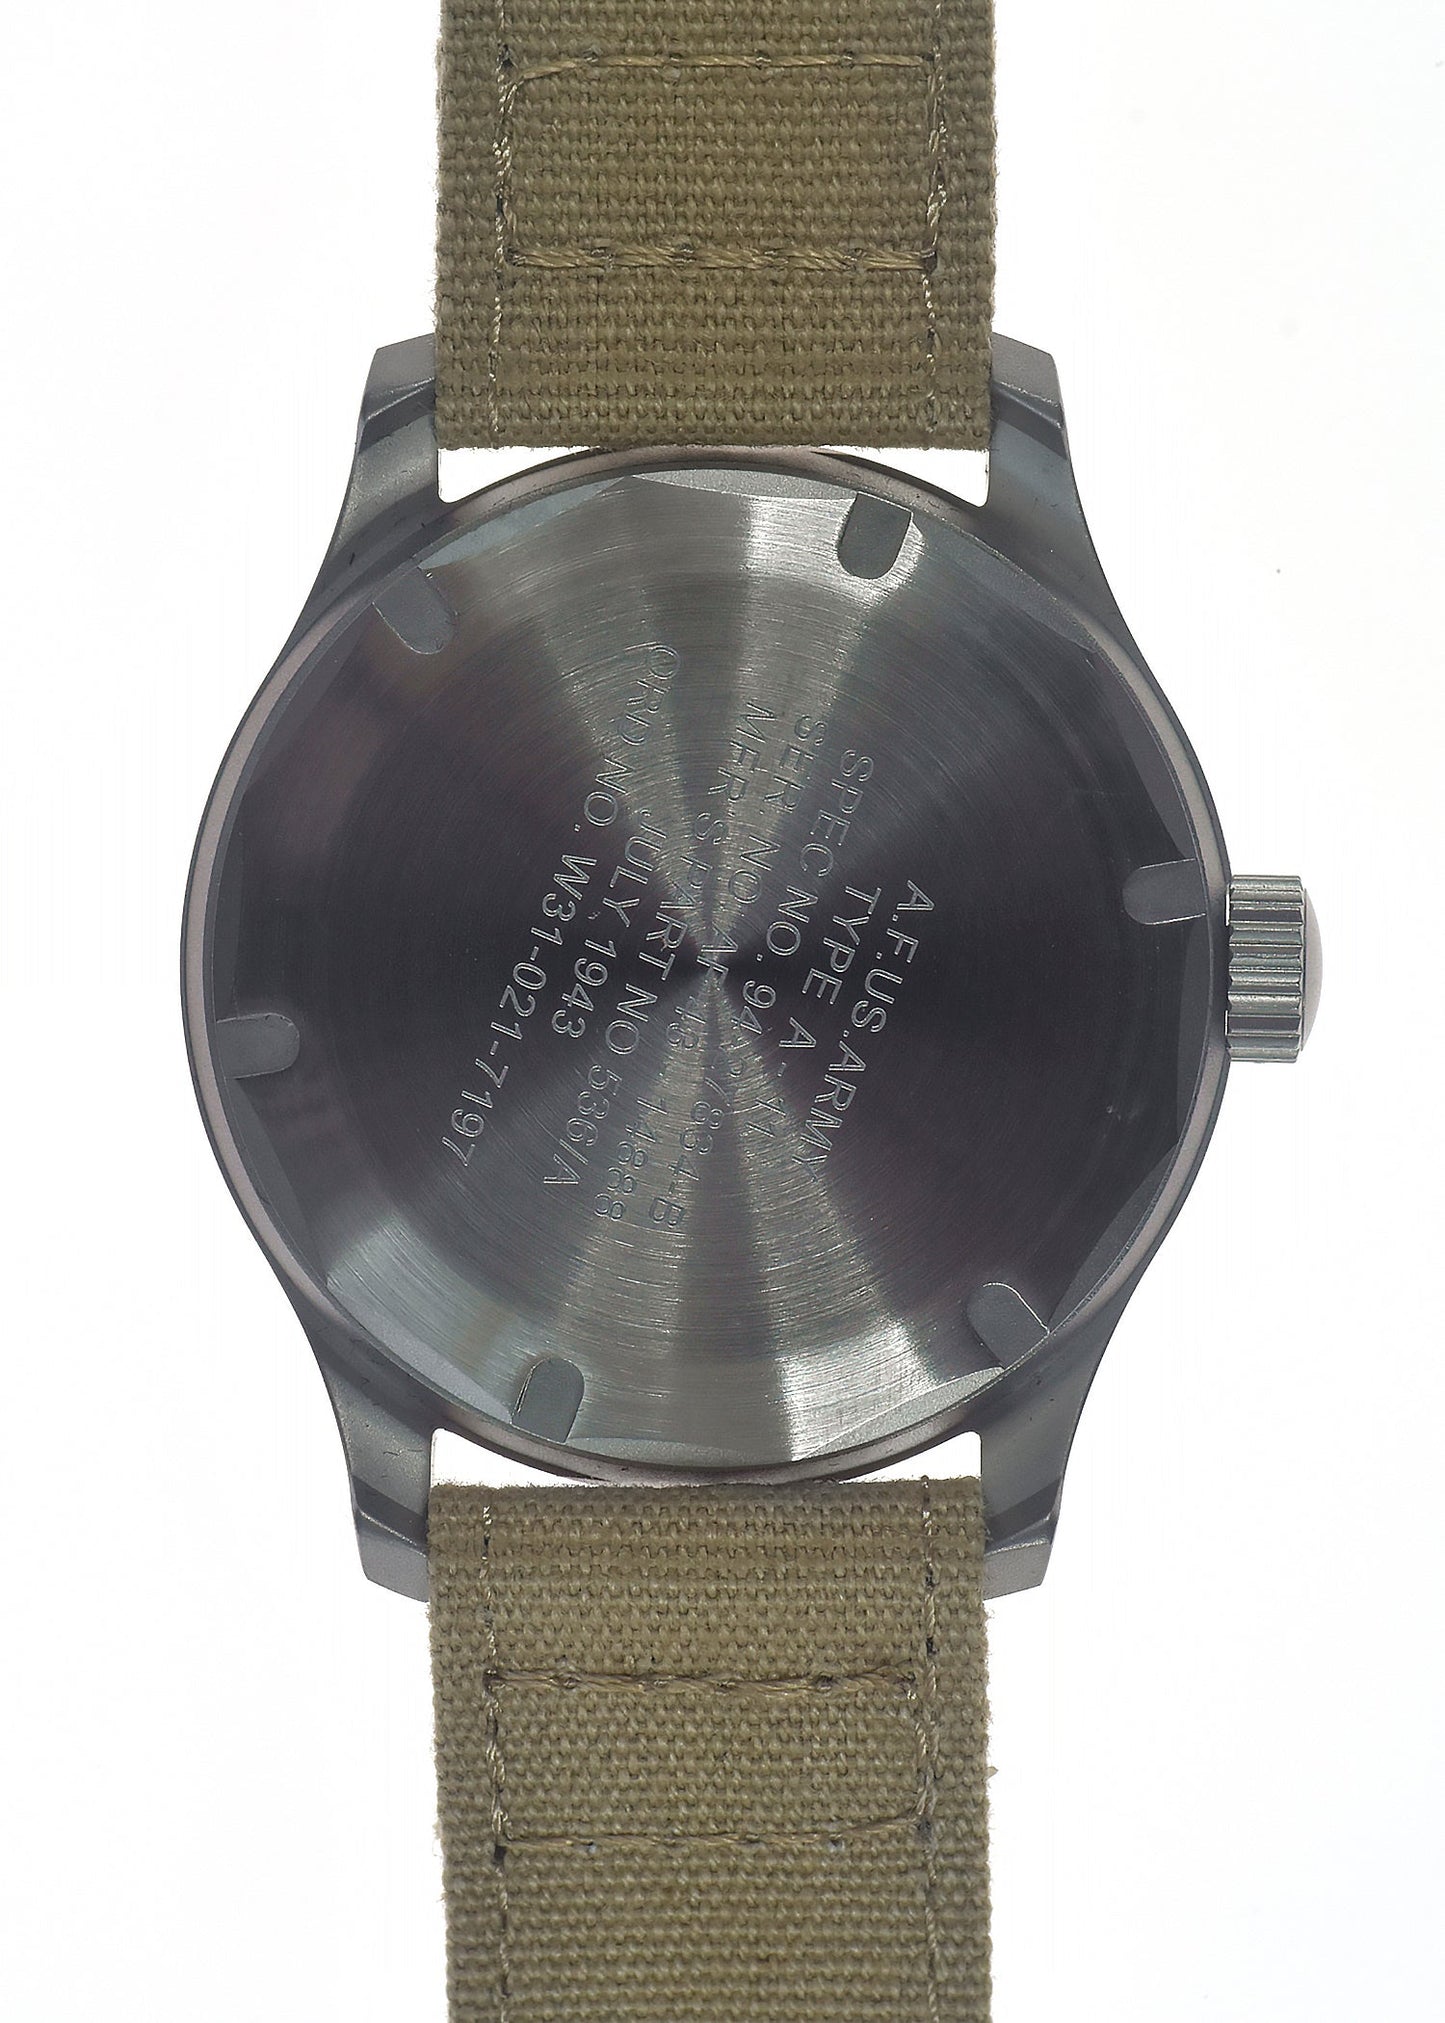 A-11 1940s WWII Pattern Military Watch (Quartz) with 100m Water Resistance